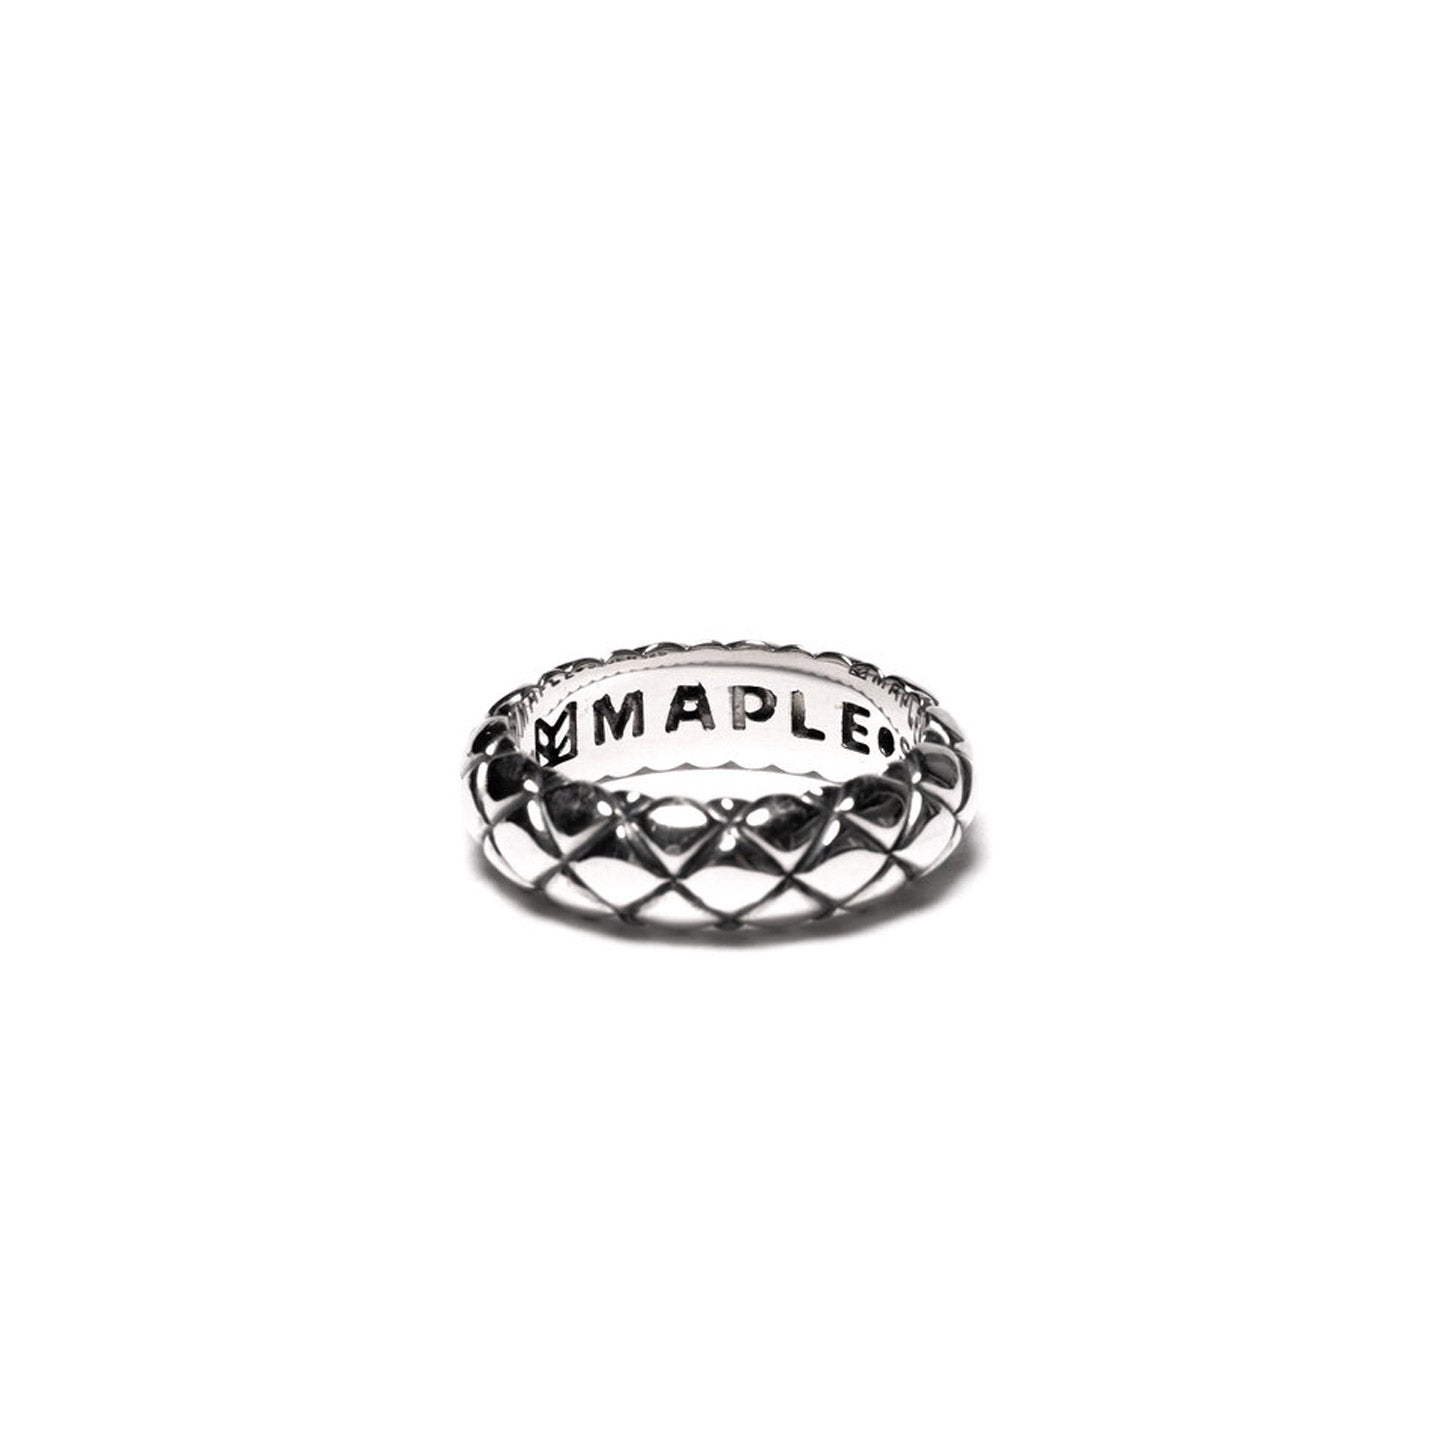 MAPLE QUILTED BAND RING SILVER 925